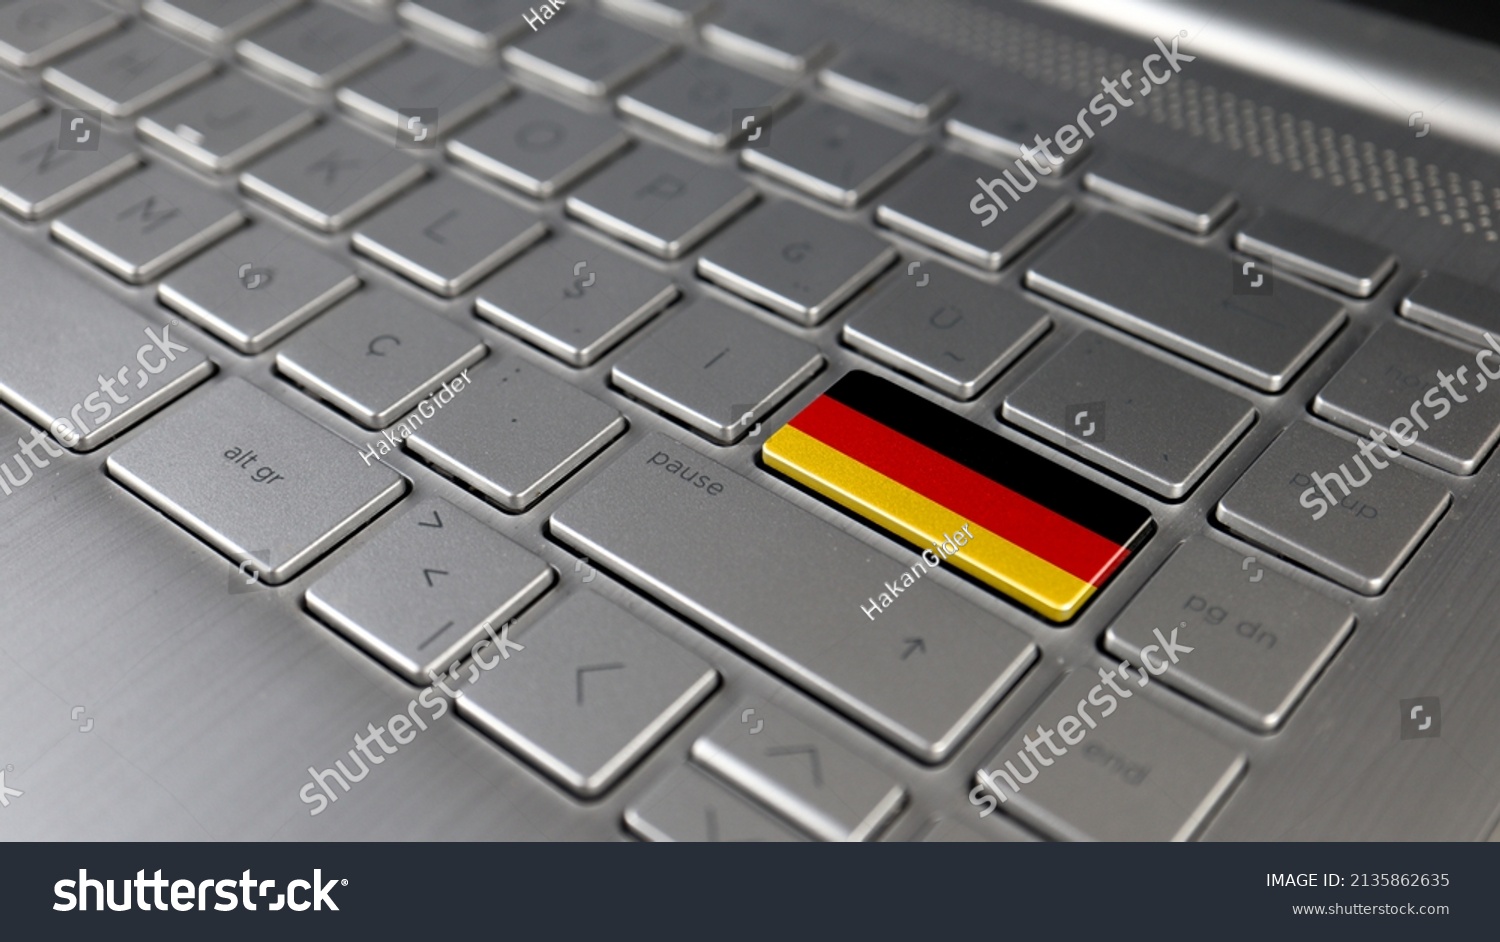 Keyboard with Germany flag on the enter button, represents cyber attack of Germany, metaphor of learning German language, grey keypad close up, front view, selective focus #2135862635